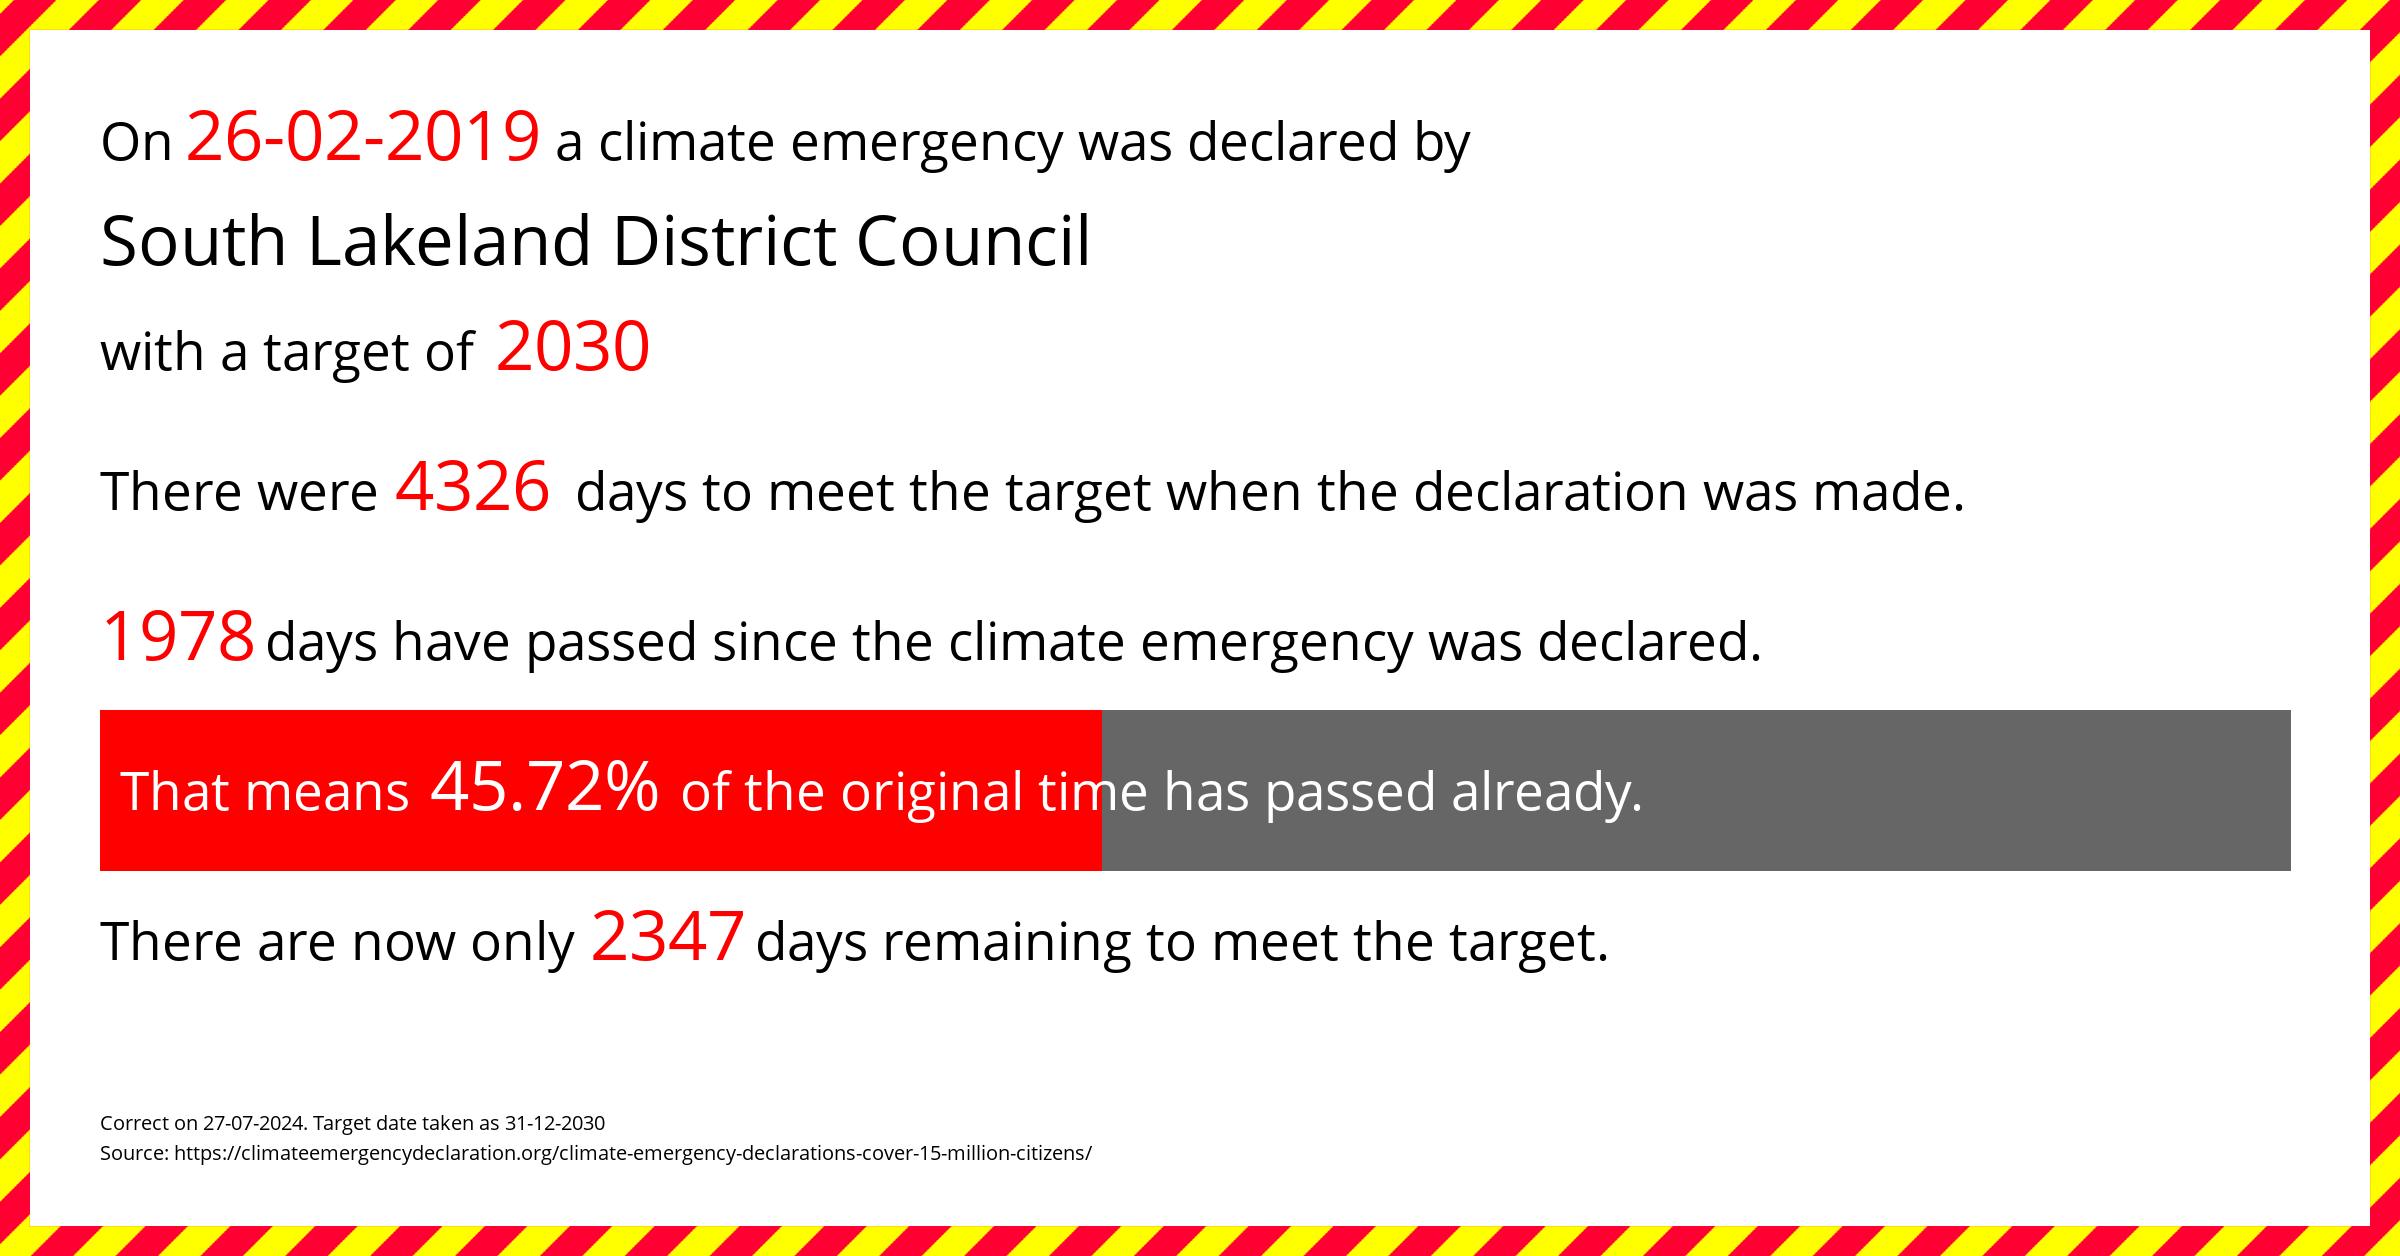 South Lakeland District Council declared a Climate emergency on Tuesday 26th February 2019, with a target of 2030.